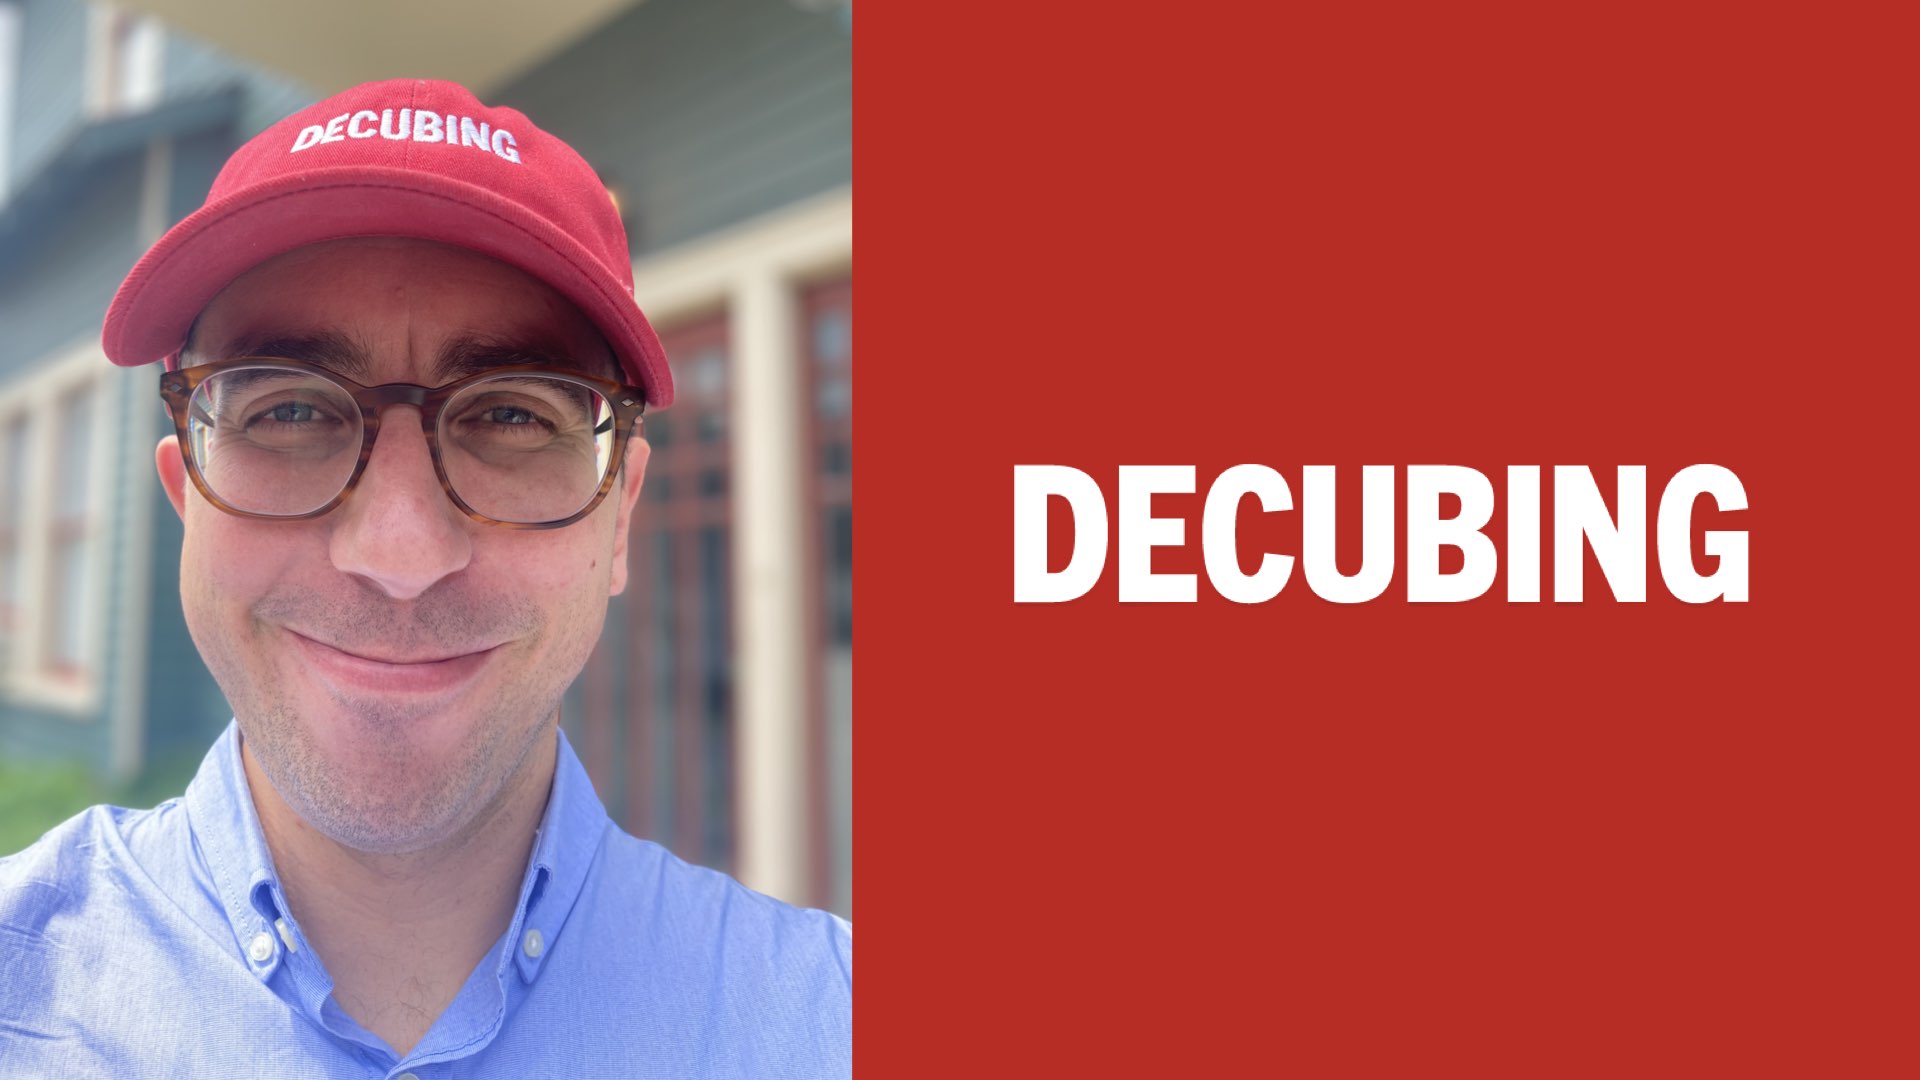 Blake Bertuccelli-Booth Returns to Build “The Age of Access” with Decubing